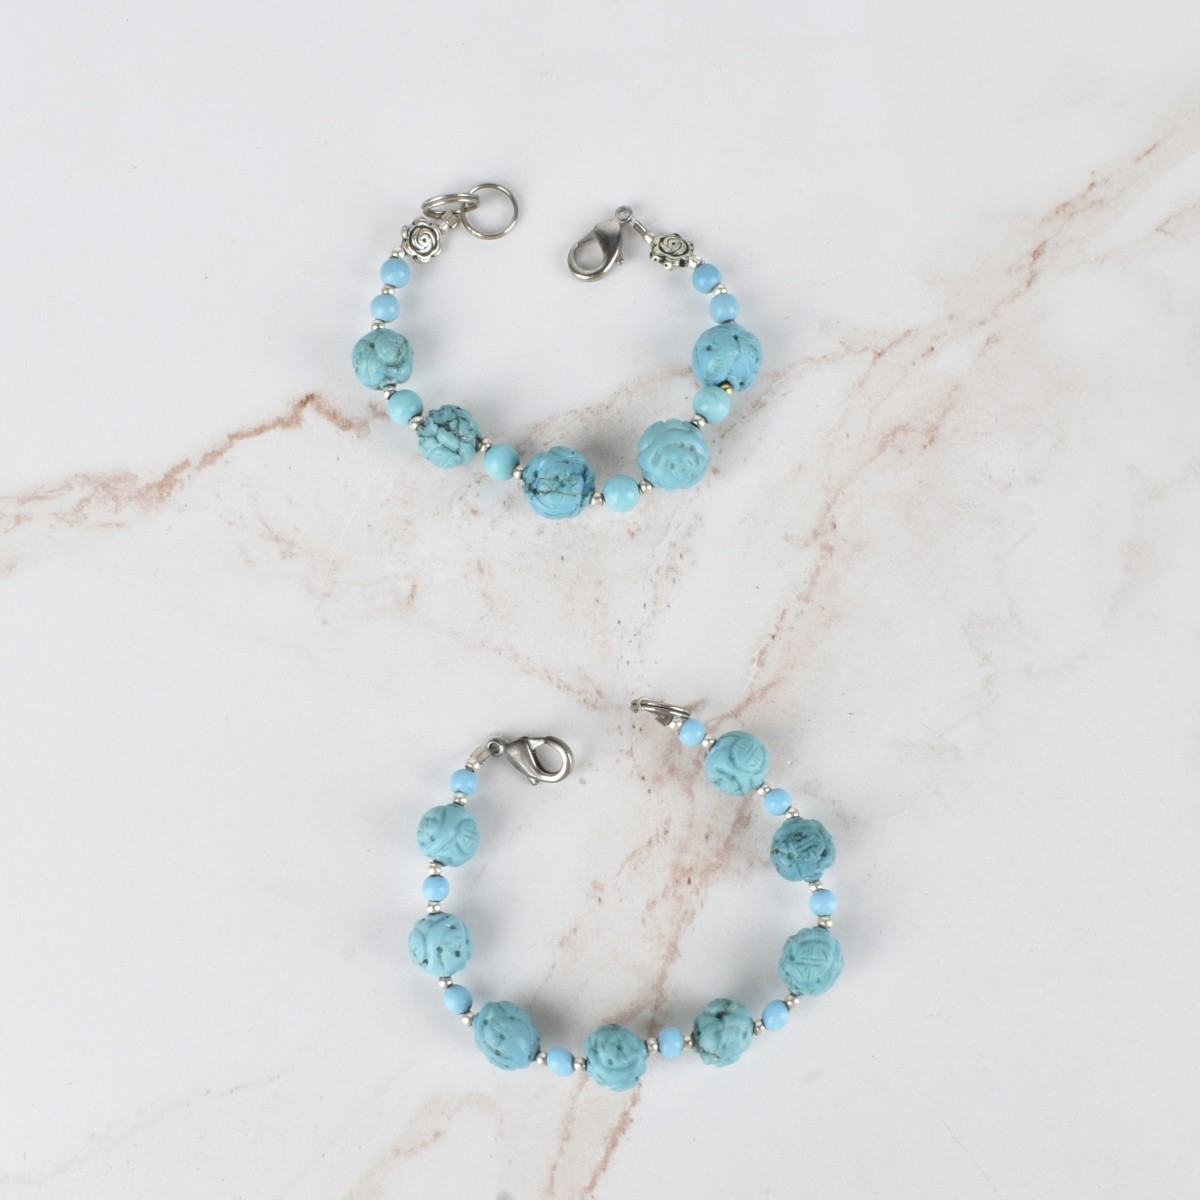 Turquoise Necklace and Bracelets